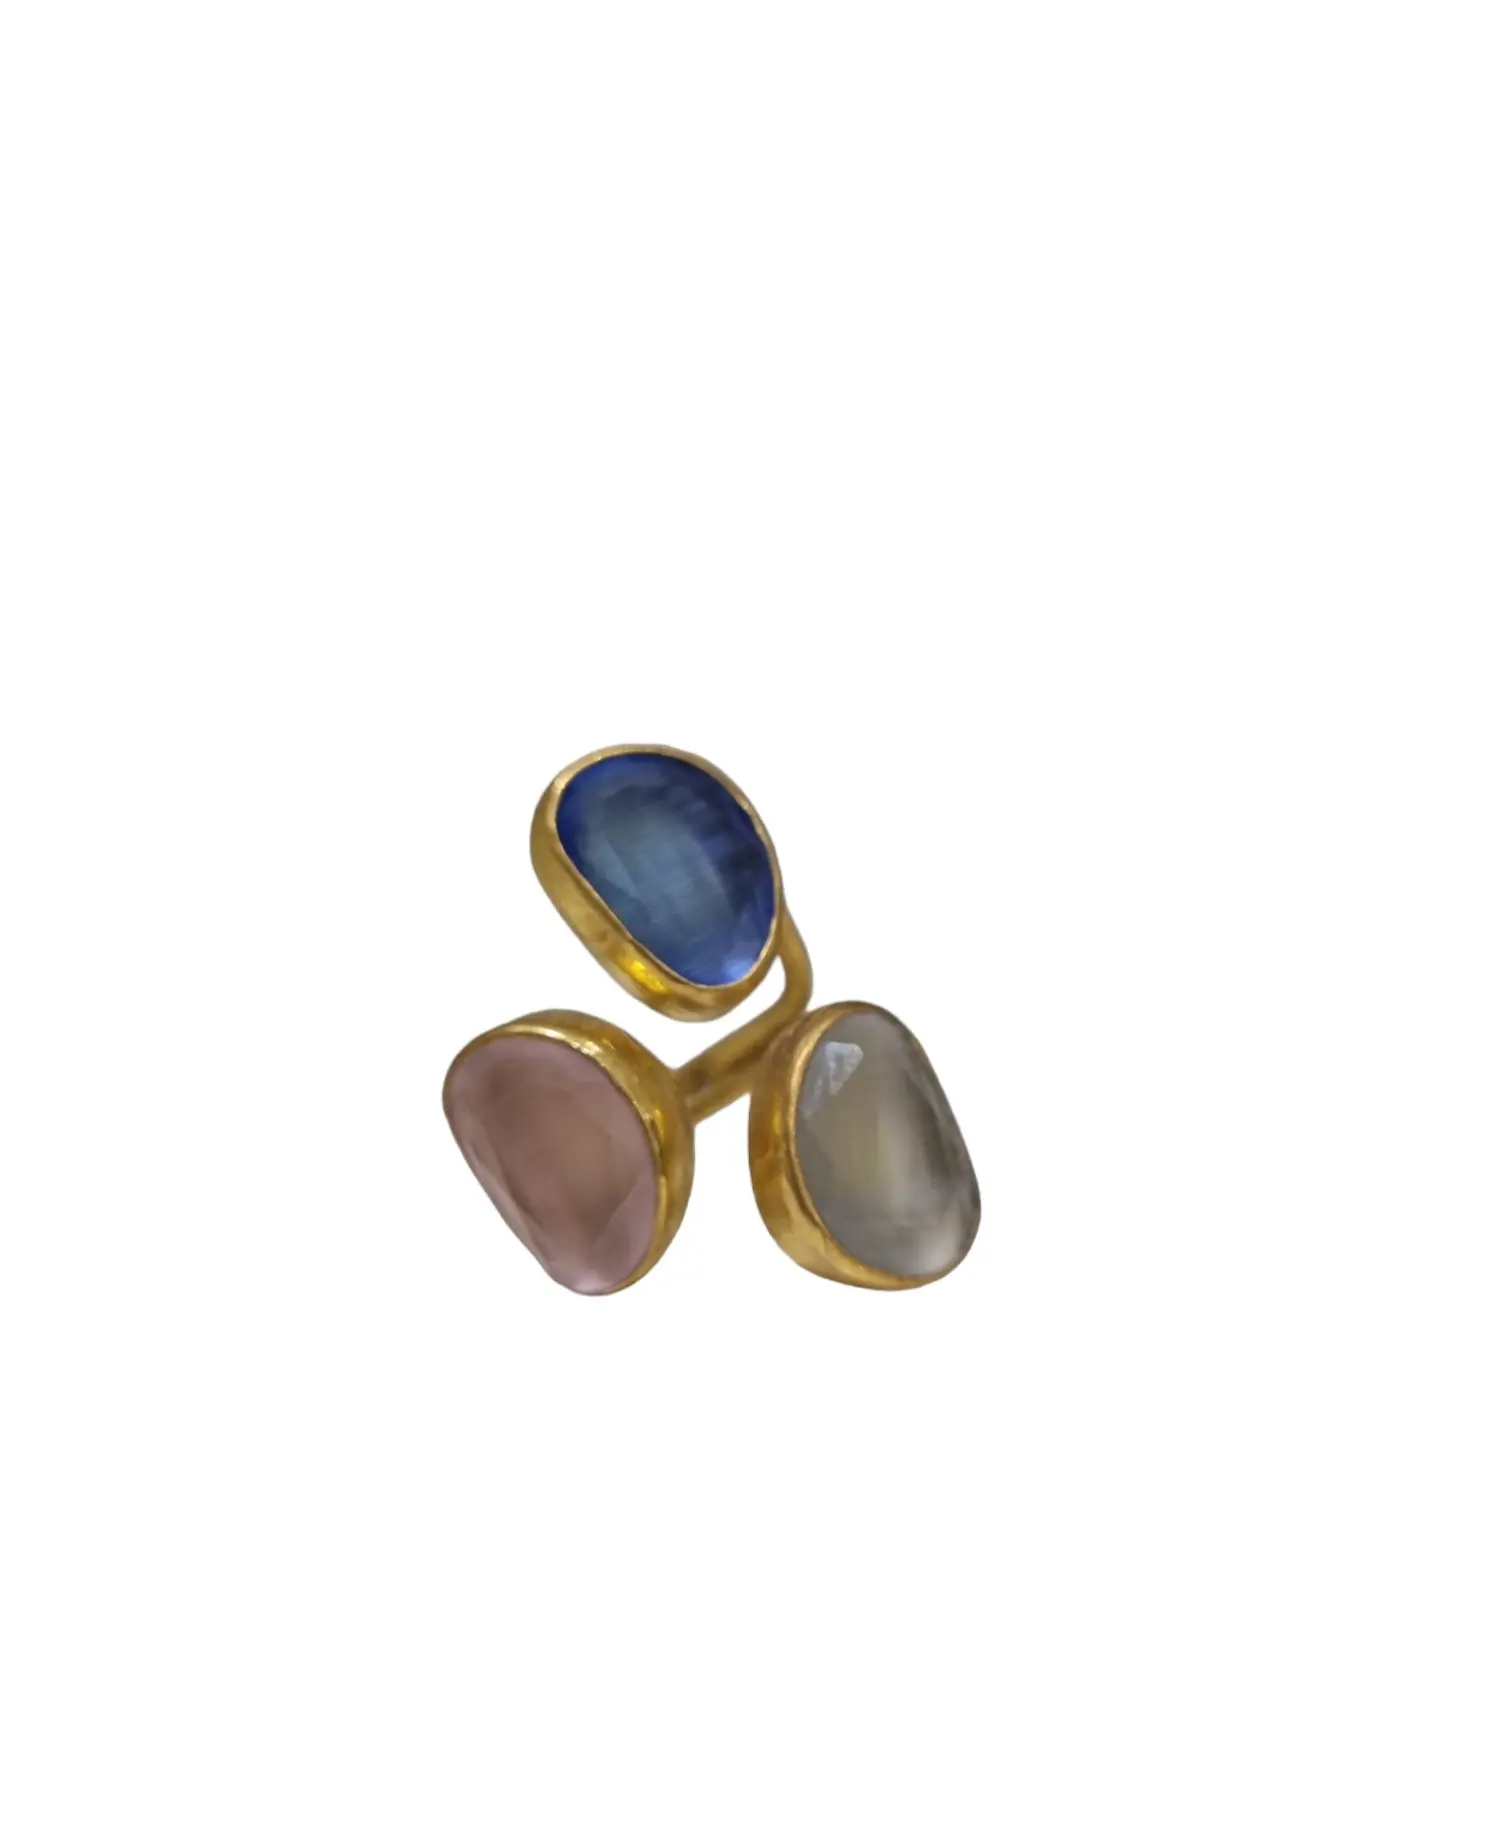 Adjustable ring made with cat's eye and brass.